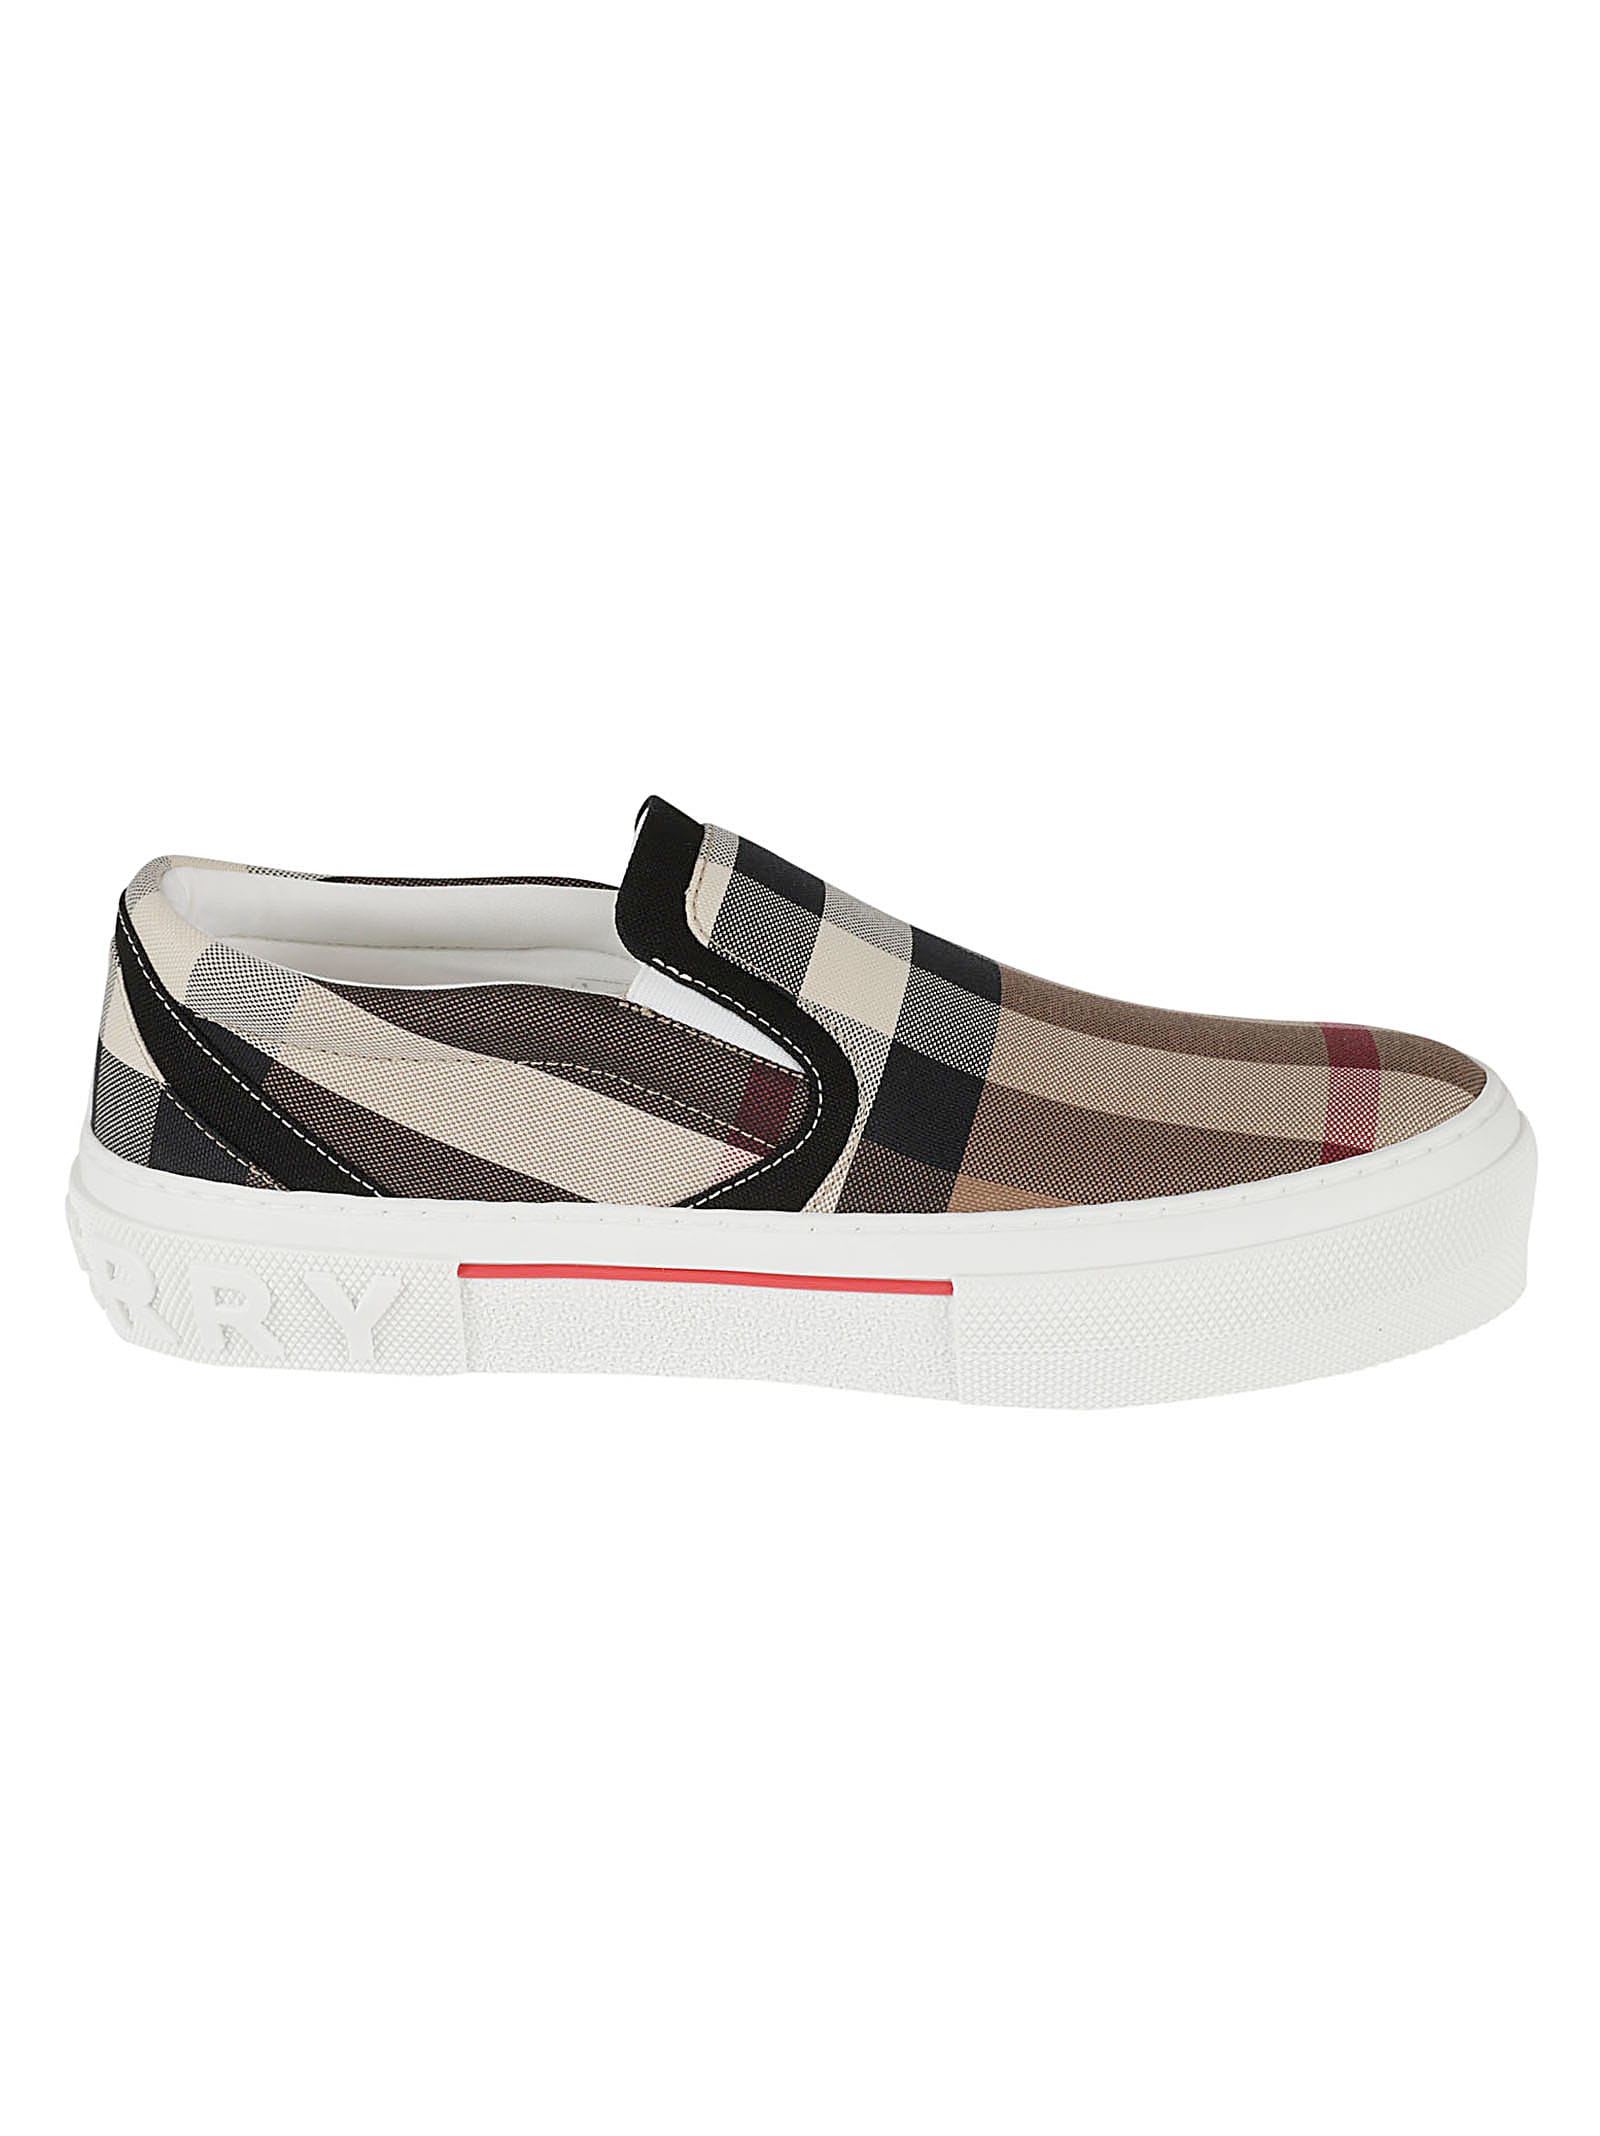 Burberry Curt Check Slip-on Sneakers